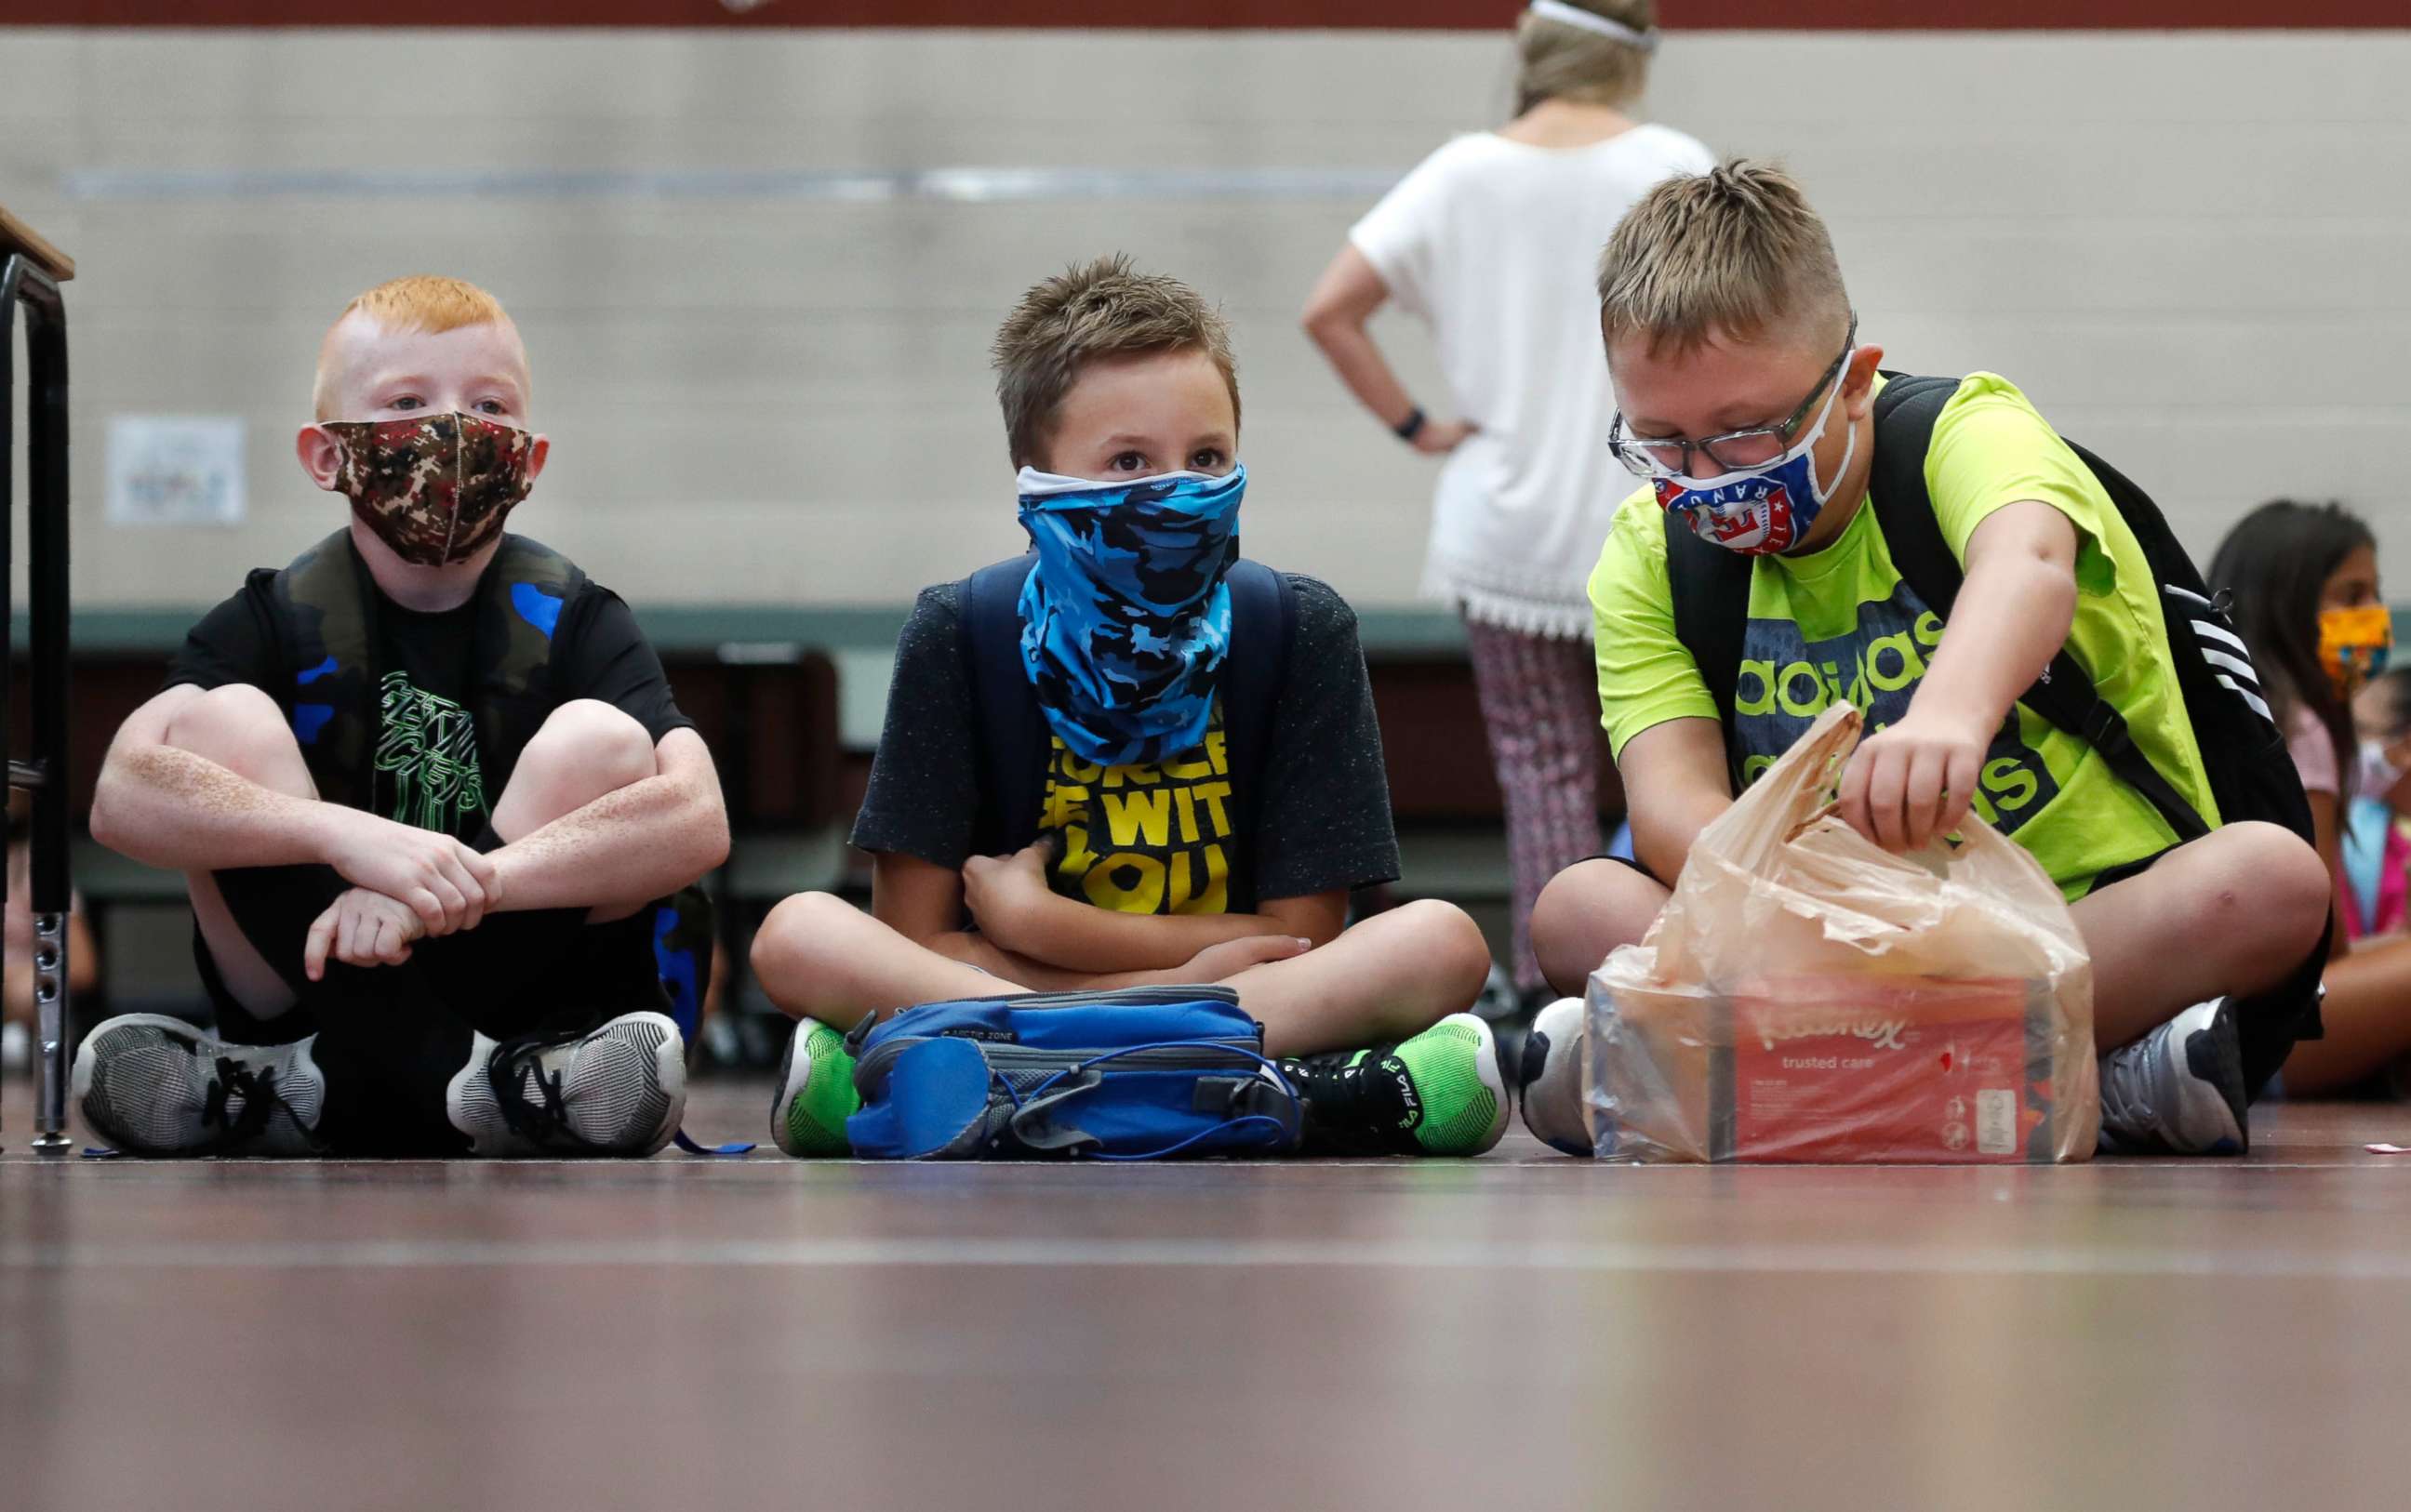 PHOTO: Elementary school students wearing masks to prevent the spread of COVID-19 wait for classes to begin in Godley, Texas, Aug. 5, 2020.